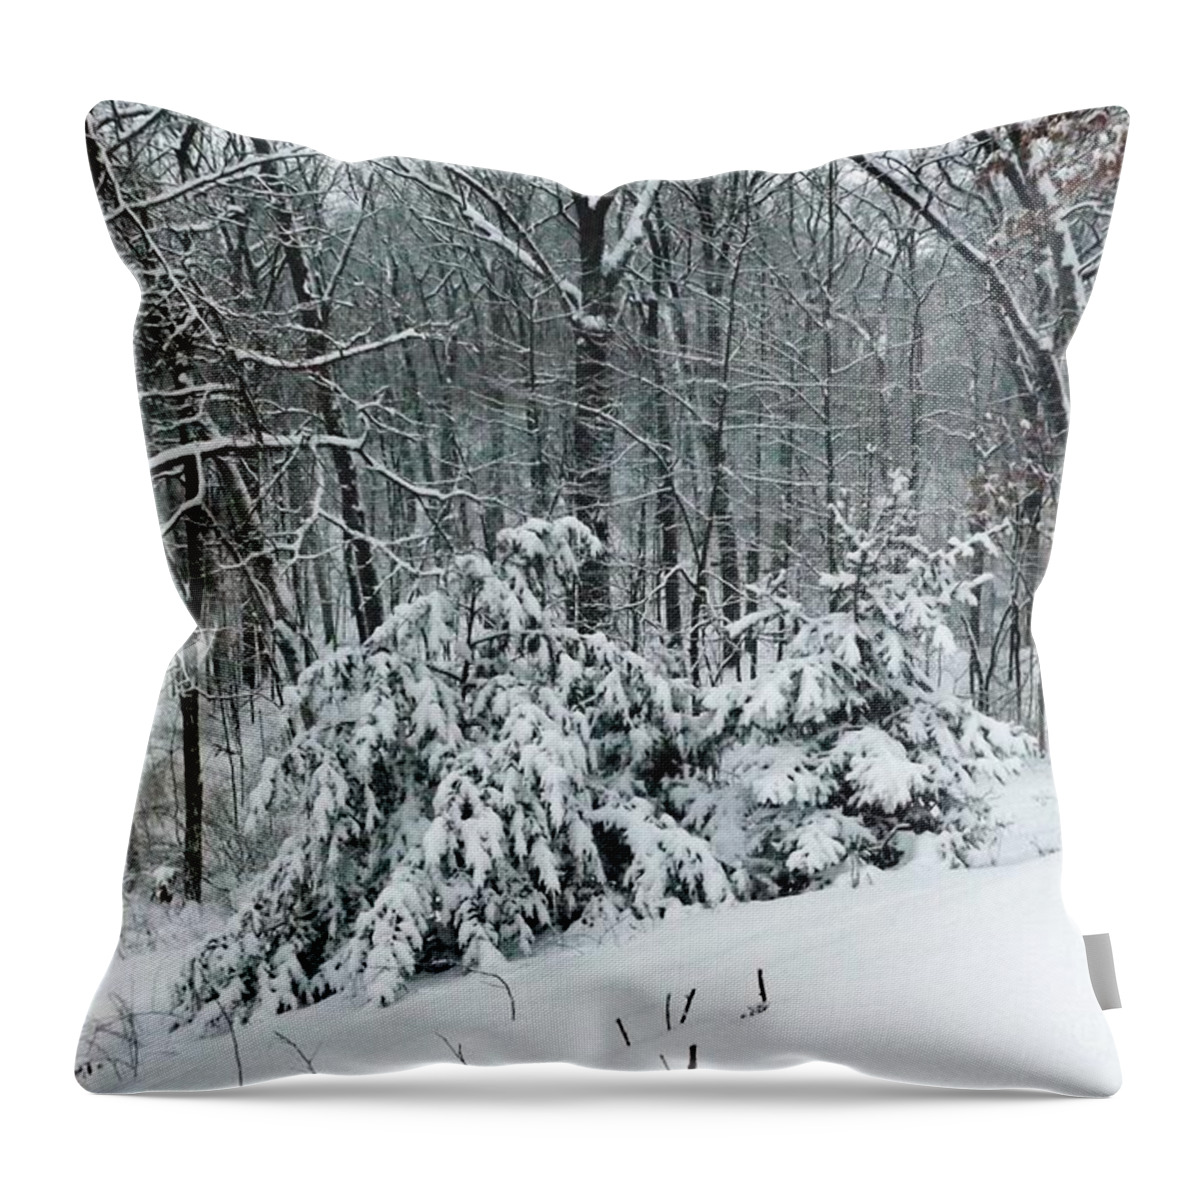 Winter Woods Throw Pillow featuring the photograph Winter Woods by Gerald Strine